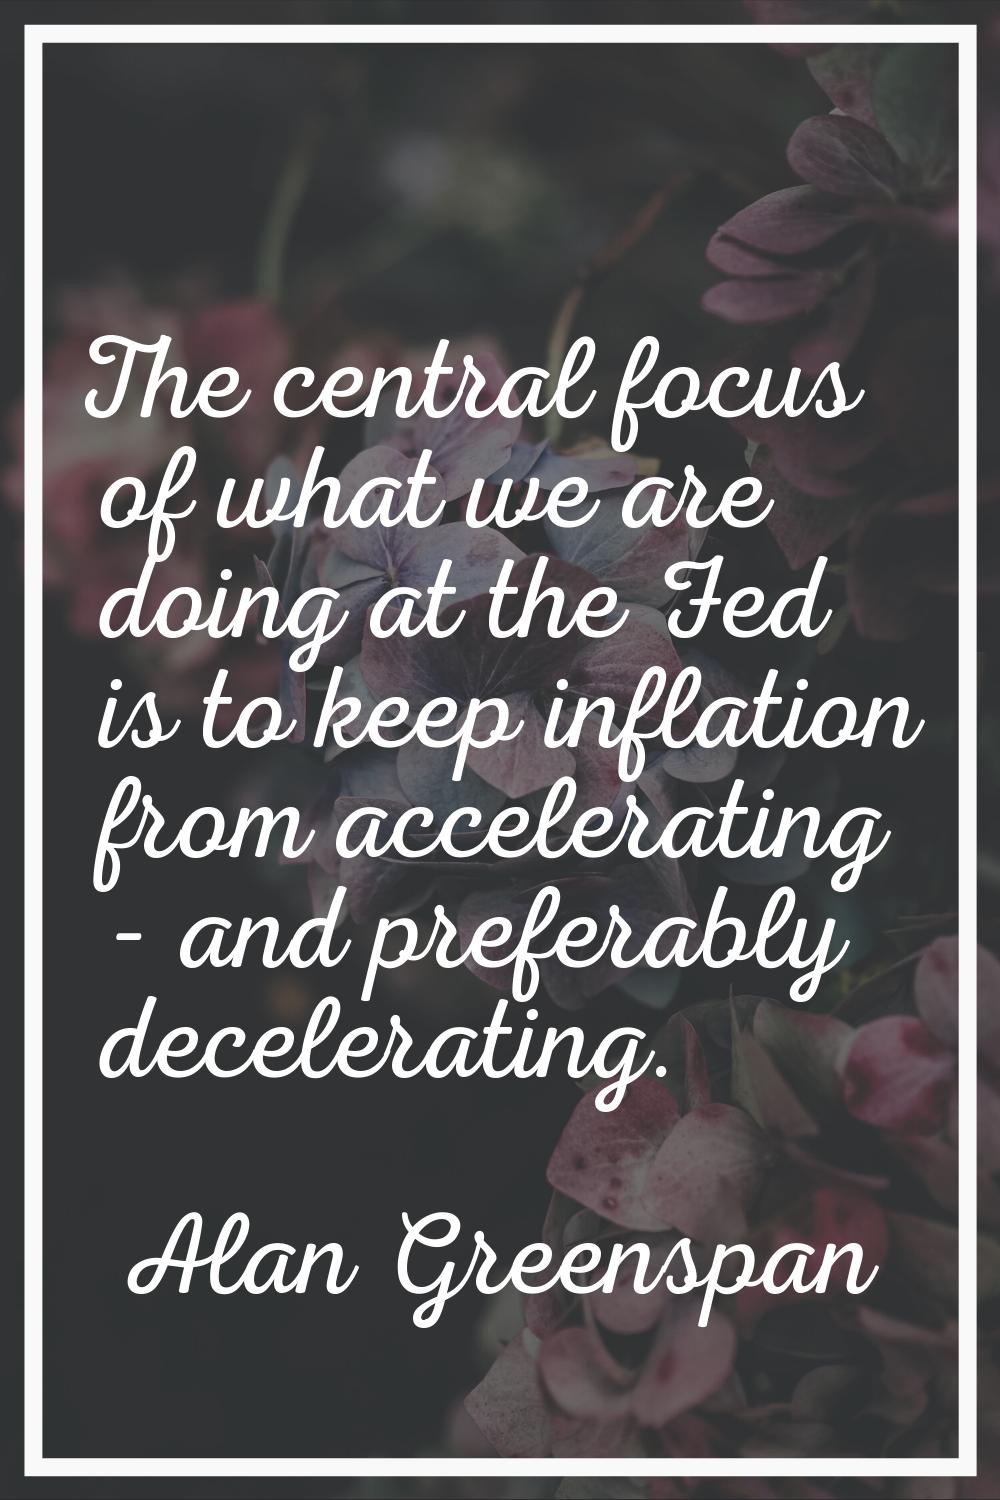 The central focus of what we are doing at the Fed is to keep inflation from accelerating - and pref